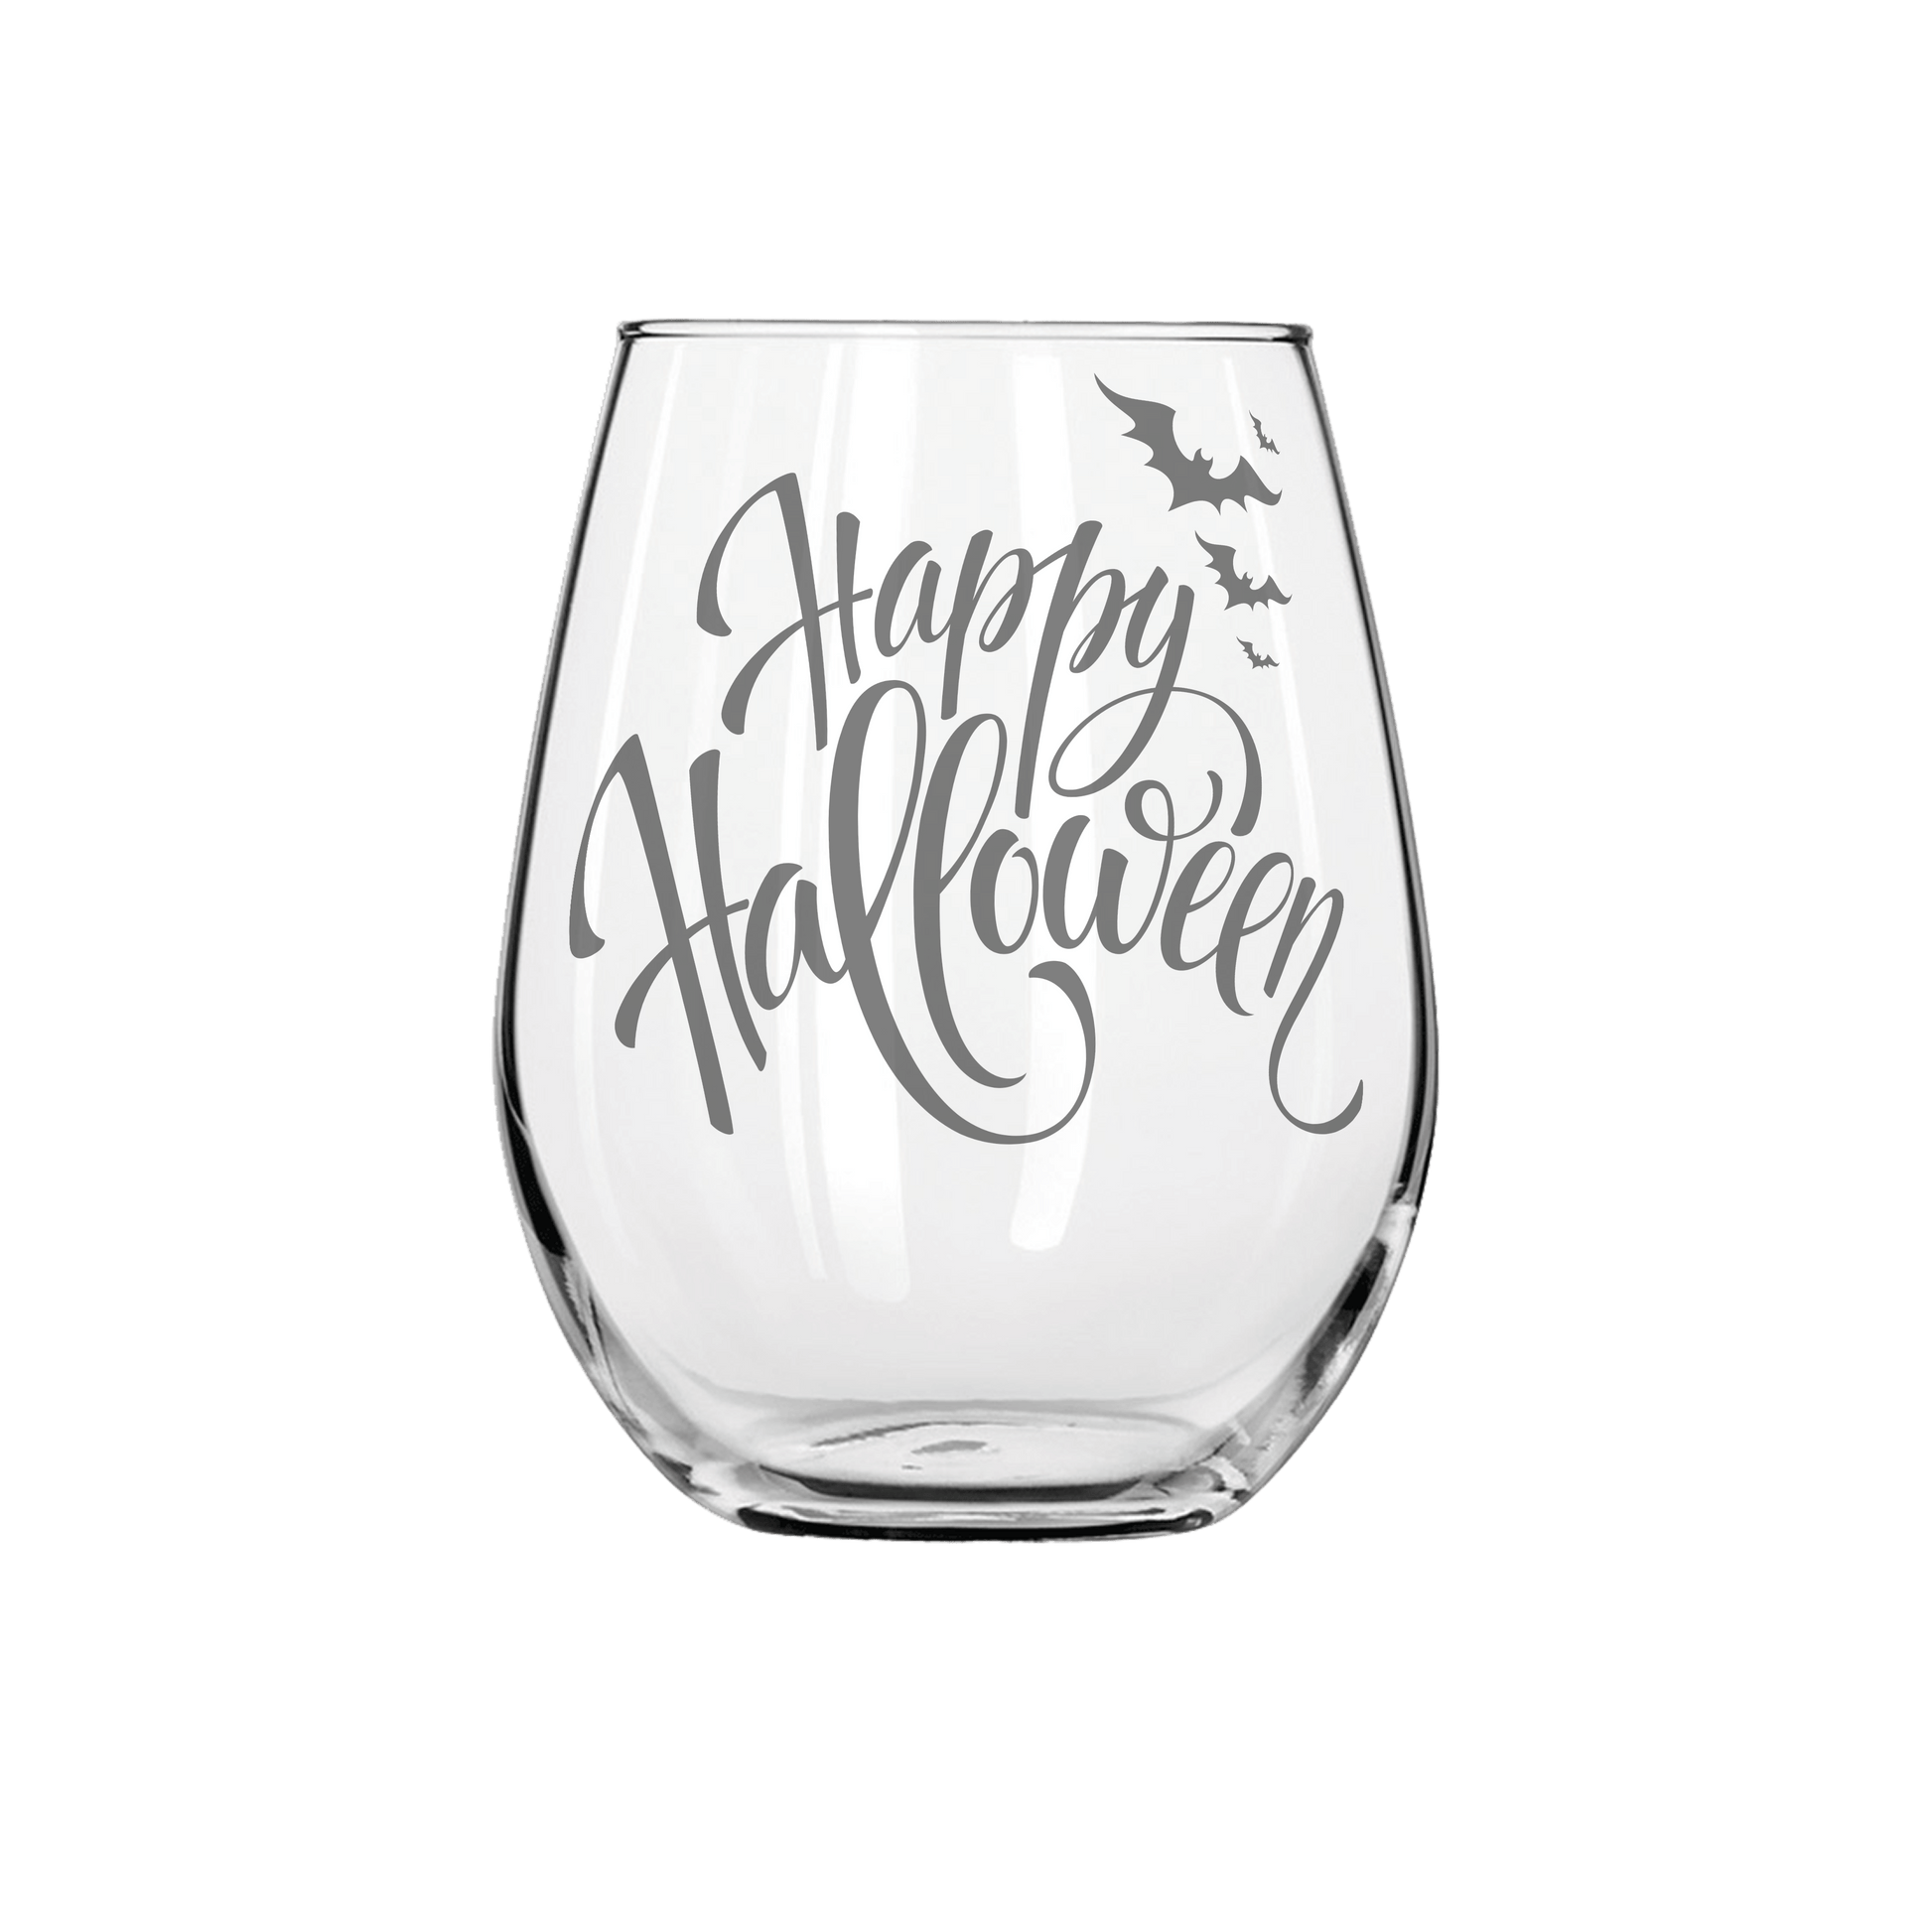 Halloween with Bats Etched Stemless Wine Glass 20.5oz - Expressive DeZien 